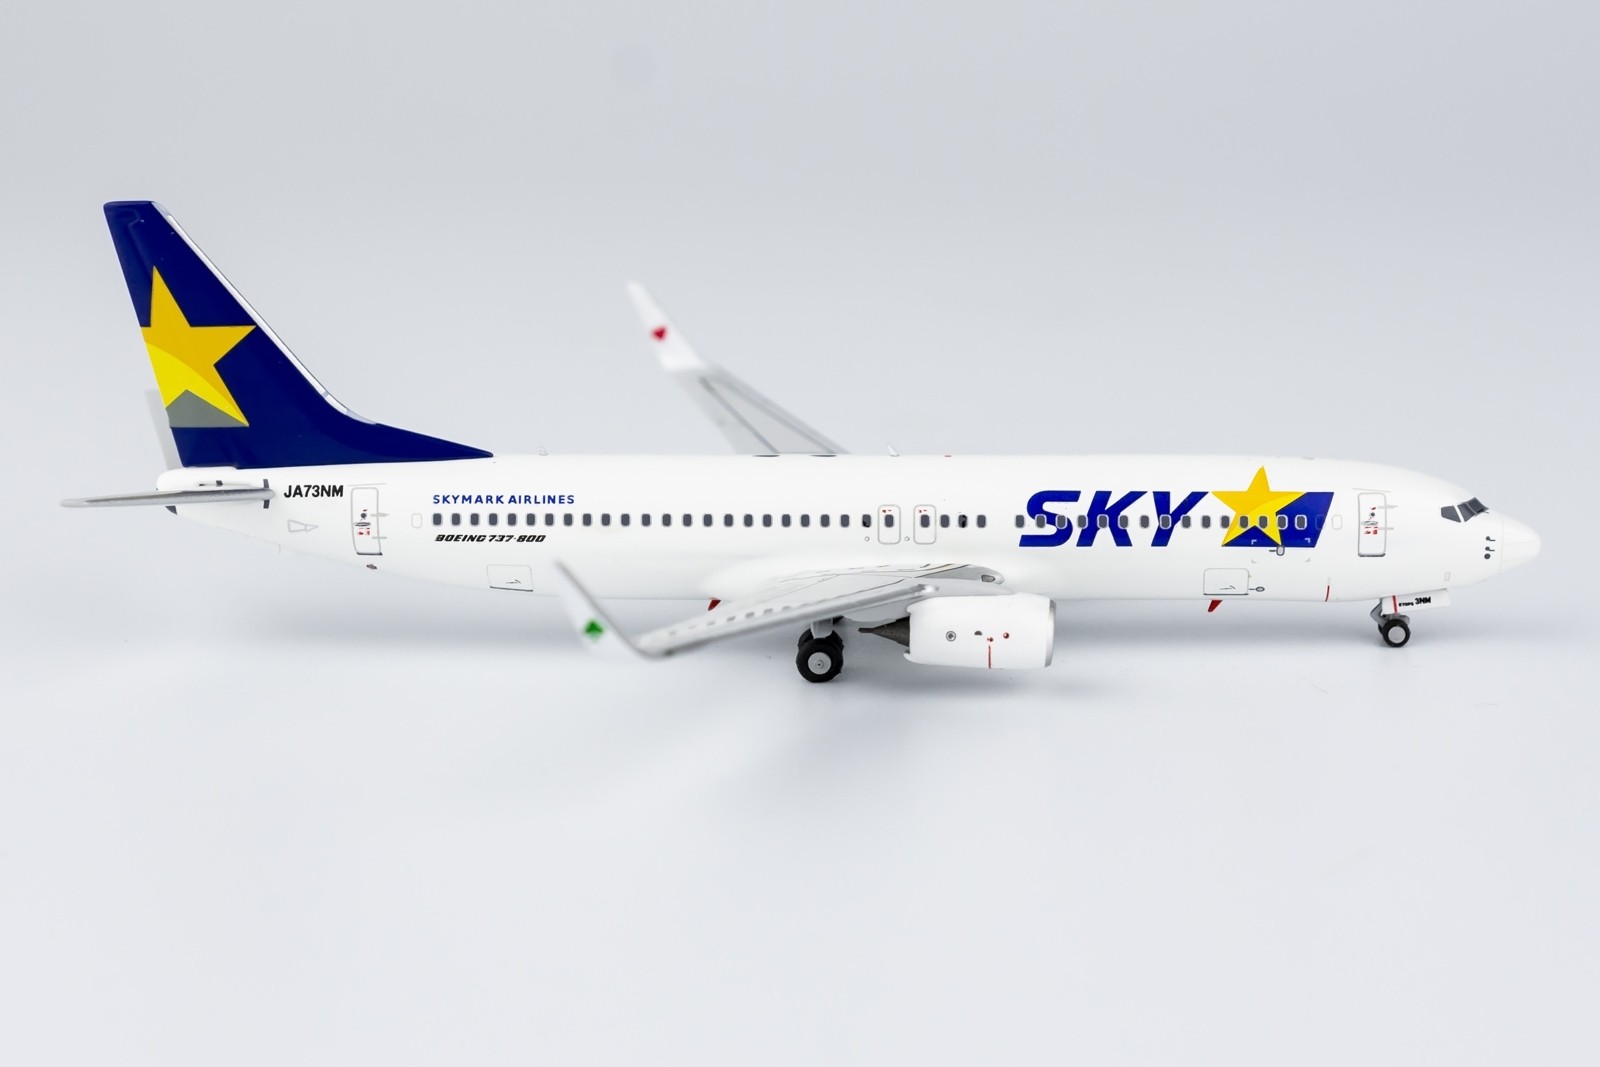 Skymark Airlines Boeing 737-800 JA73NM Winglets NG Models 58141 Scale 1:400  ezToys Diecast Models and Collectibles